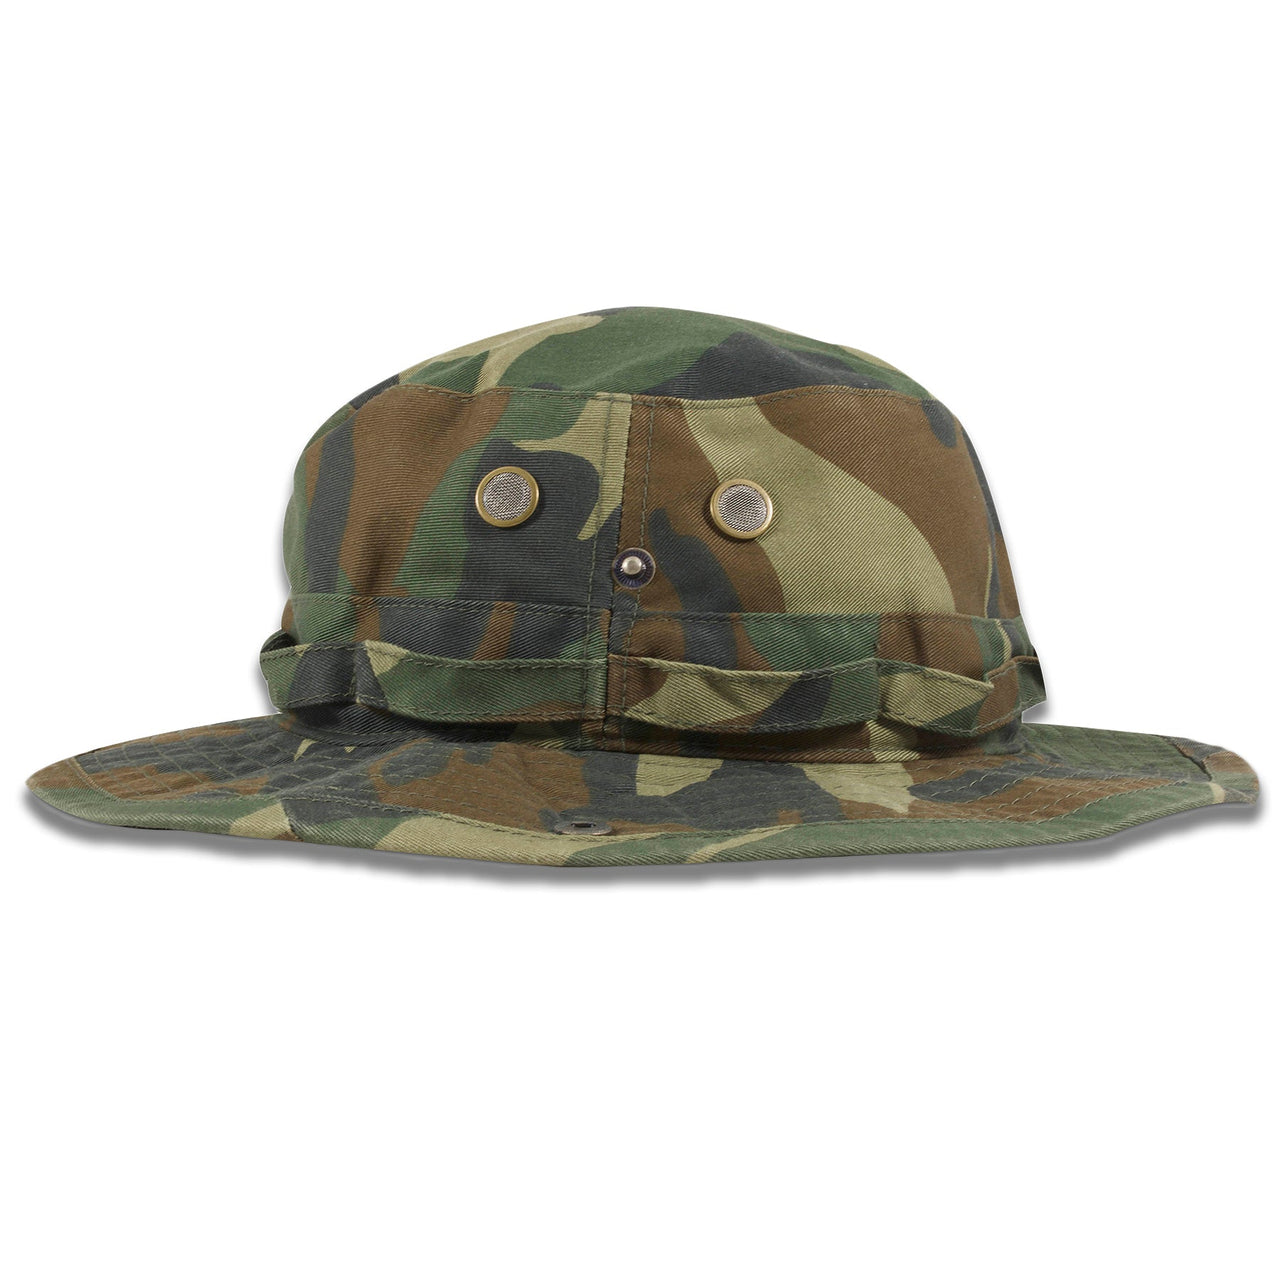 On the left side of the camouflage patterned boonie bucket hat is are breathable air holes and an adjustable button